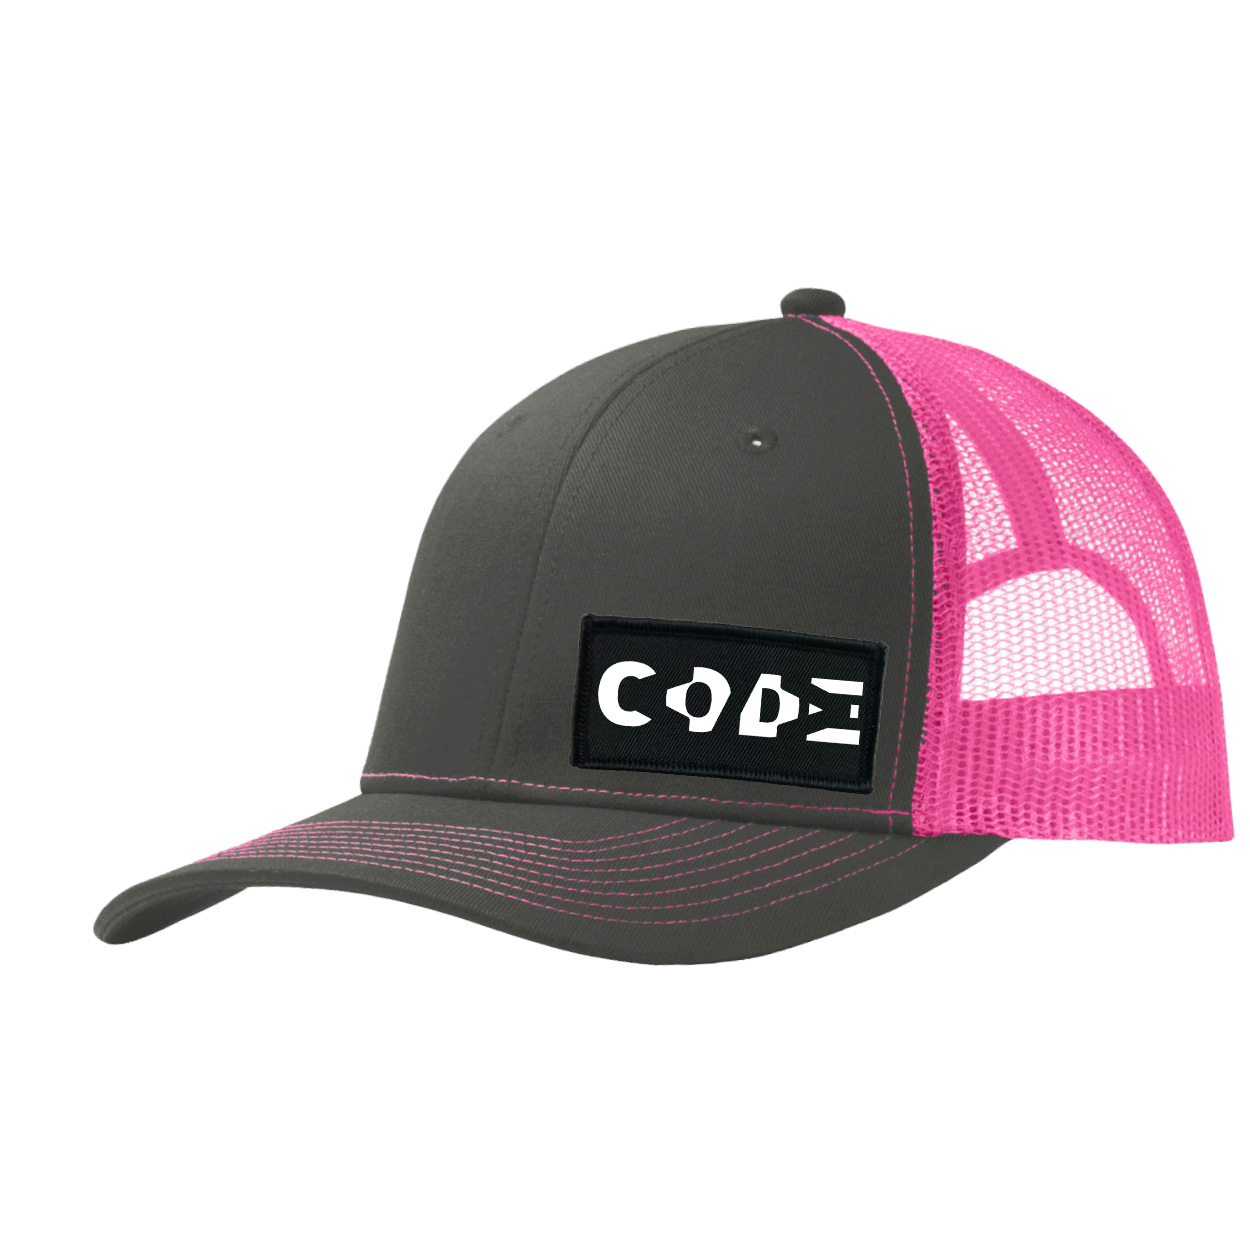 Code Tag Logo Night Out Woven Patch Snapback Trucker Hat Dark Gray/Neon Pink (White Logo)